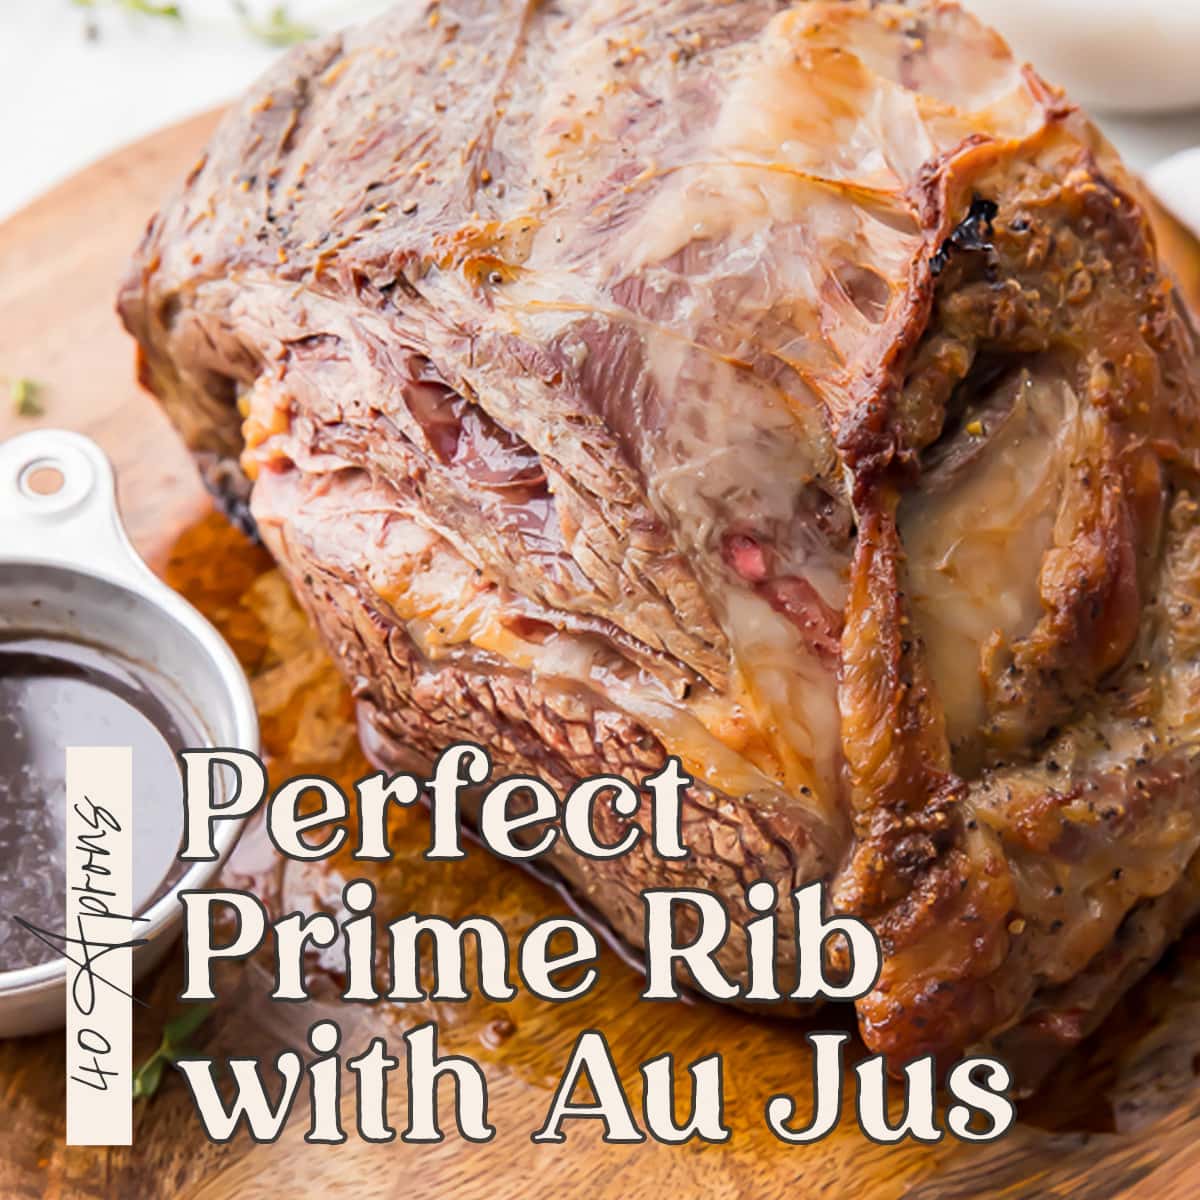 Pin graphic for prime rib with au jus.